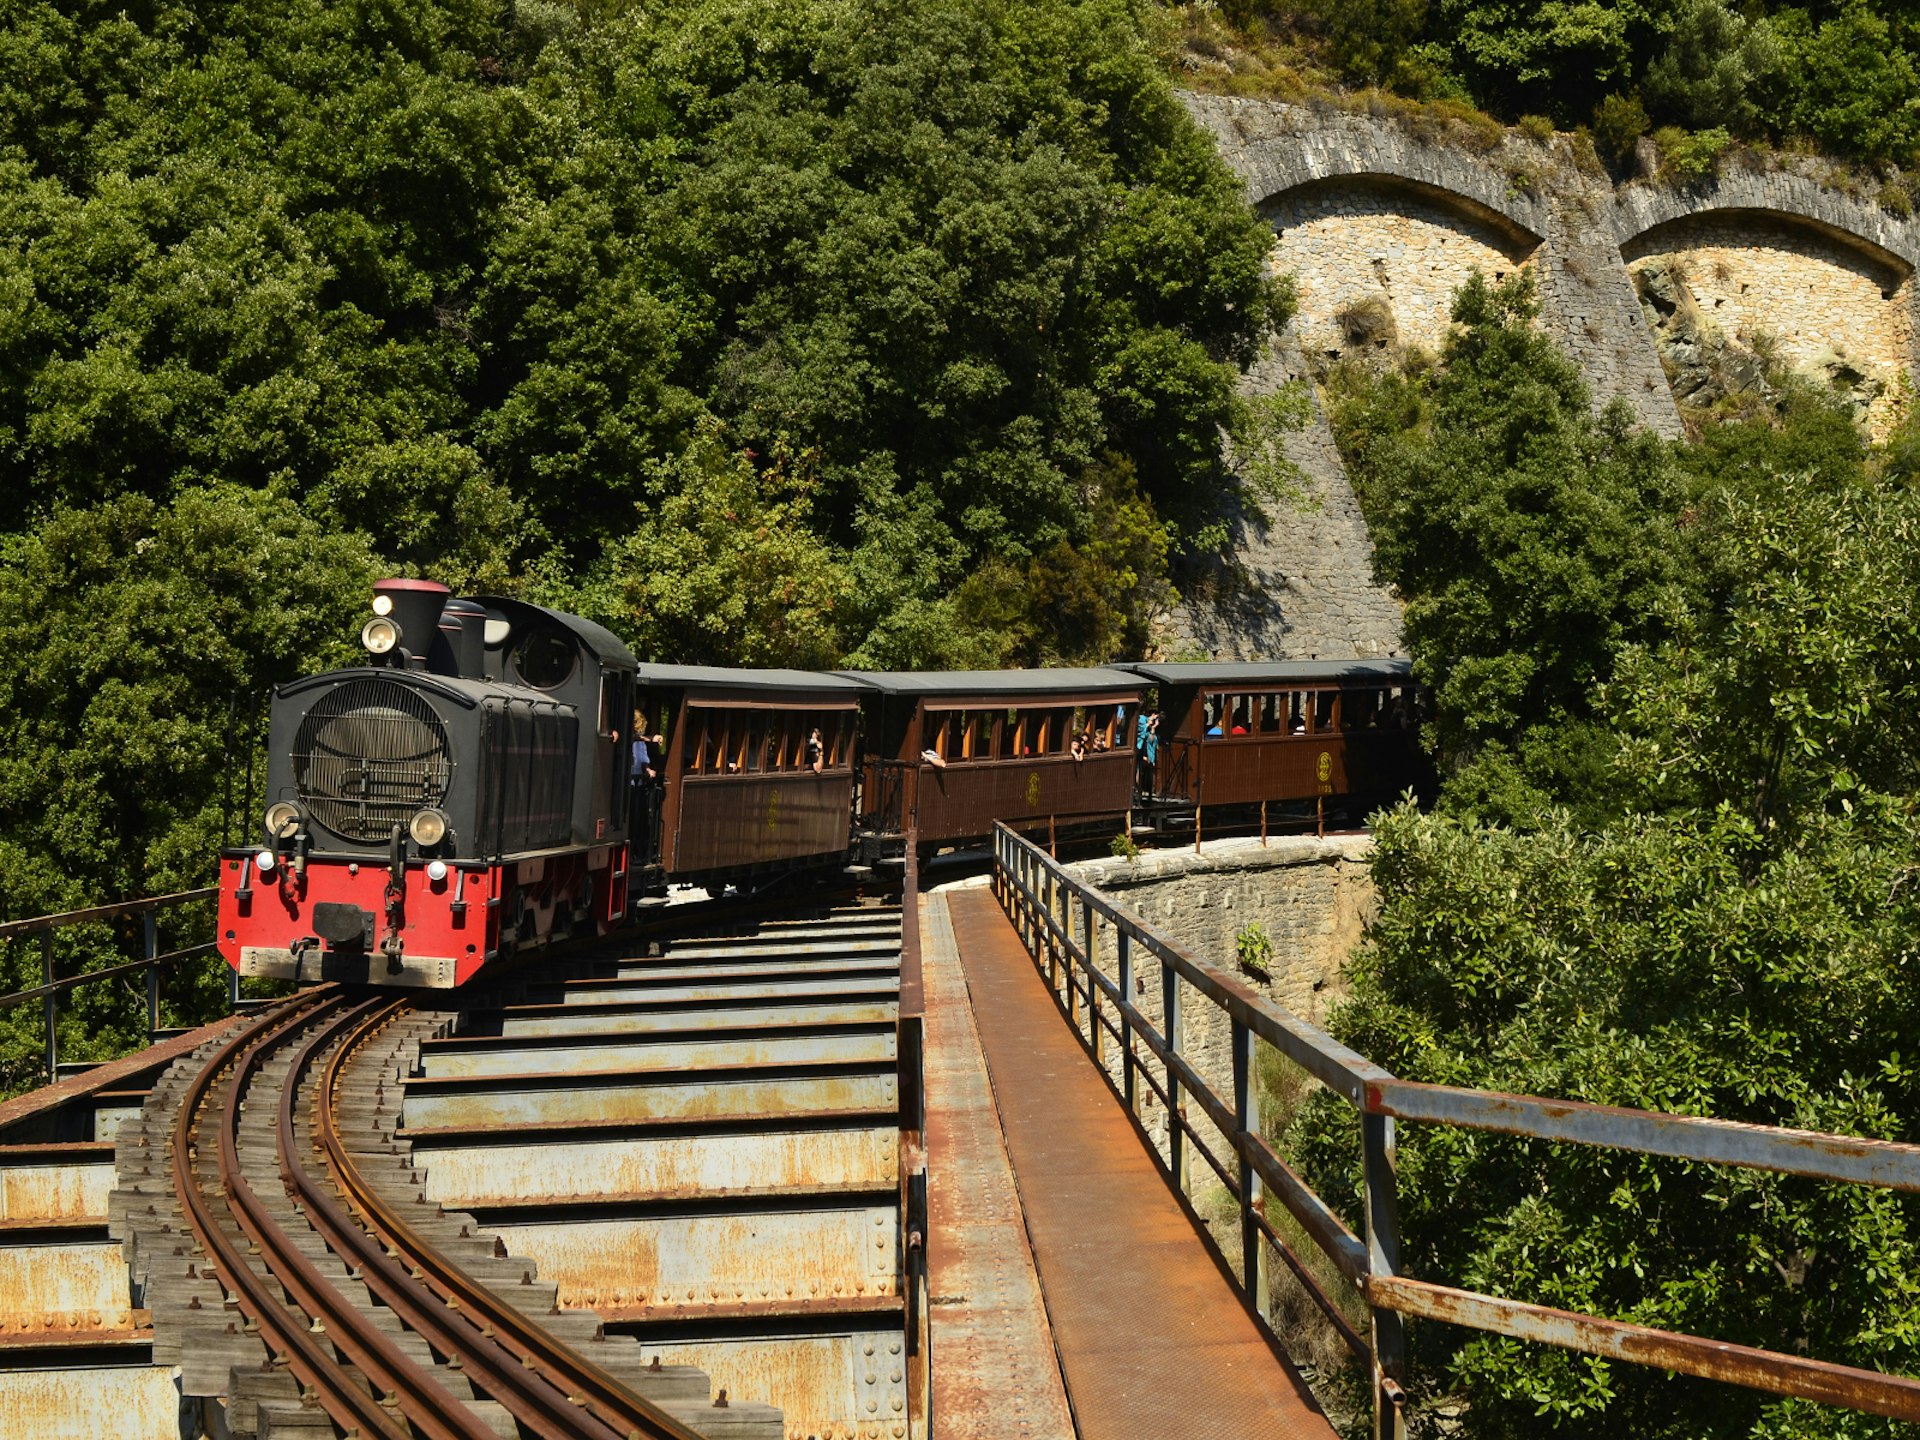 The heritage tourist train crossing a bridge in the mountains of Pelion